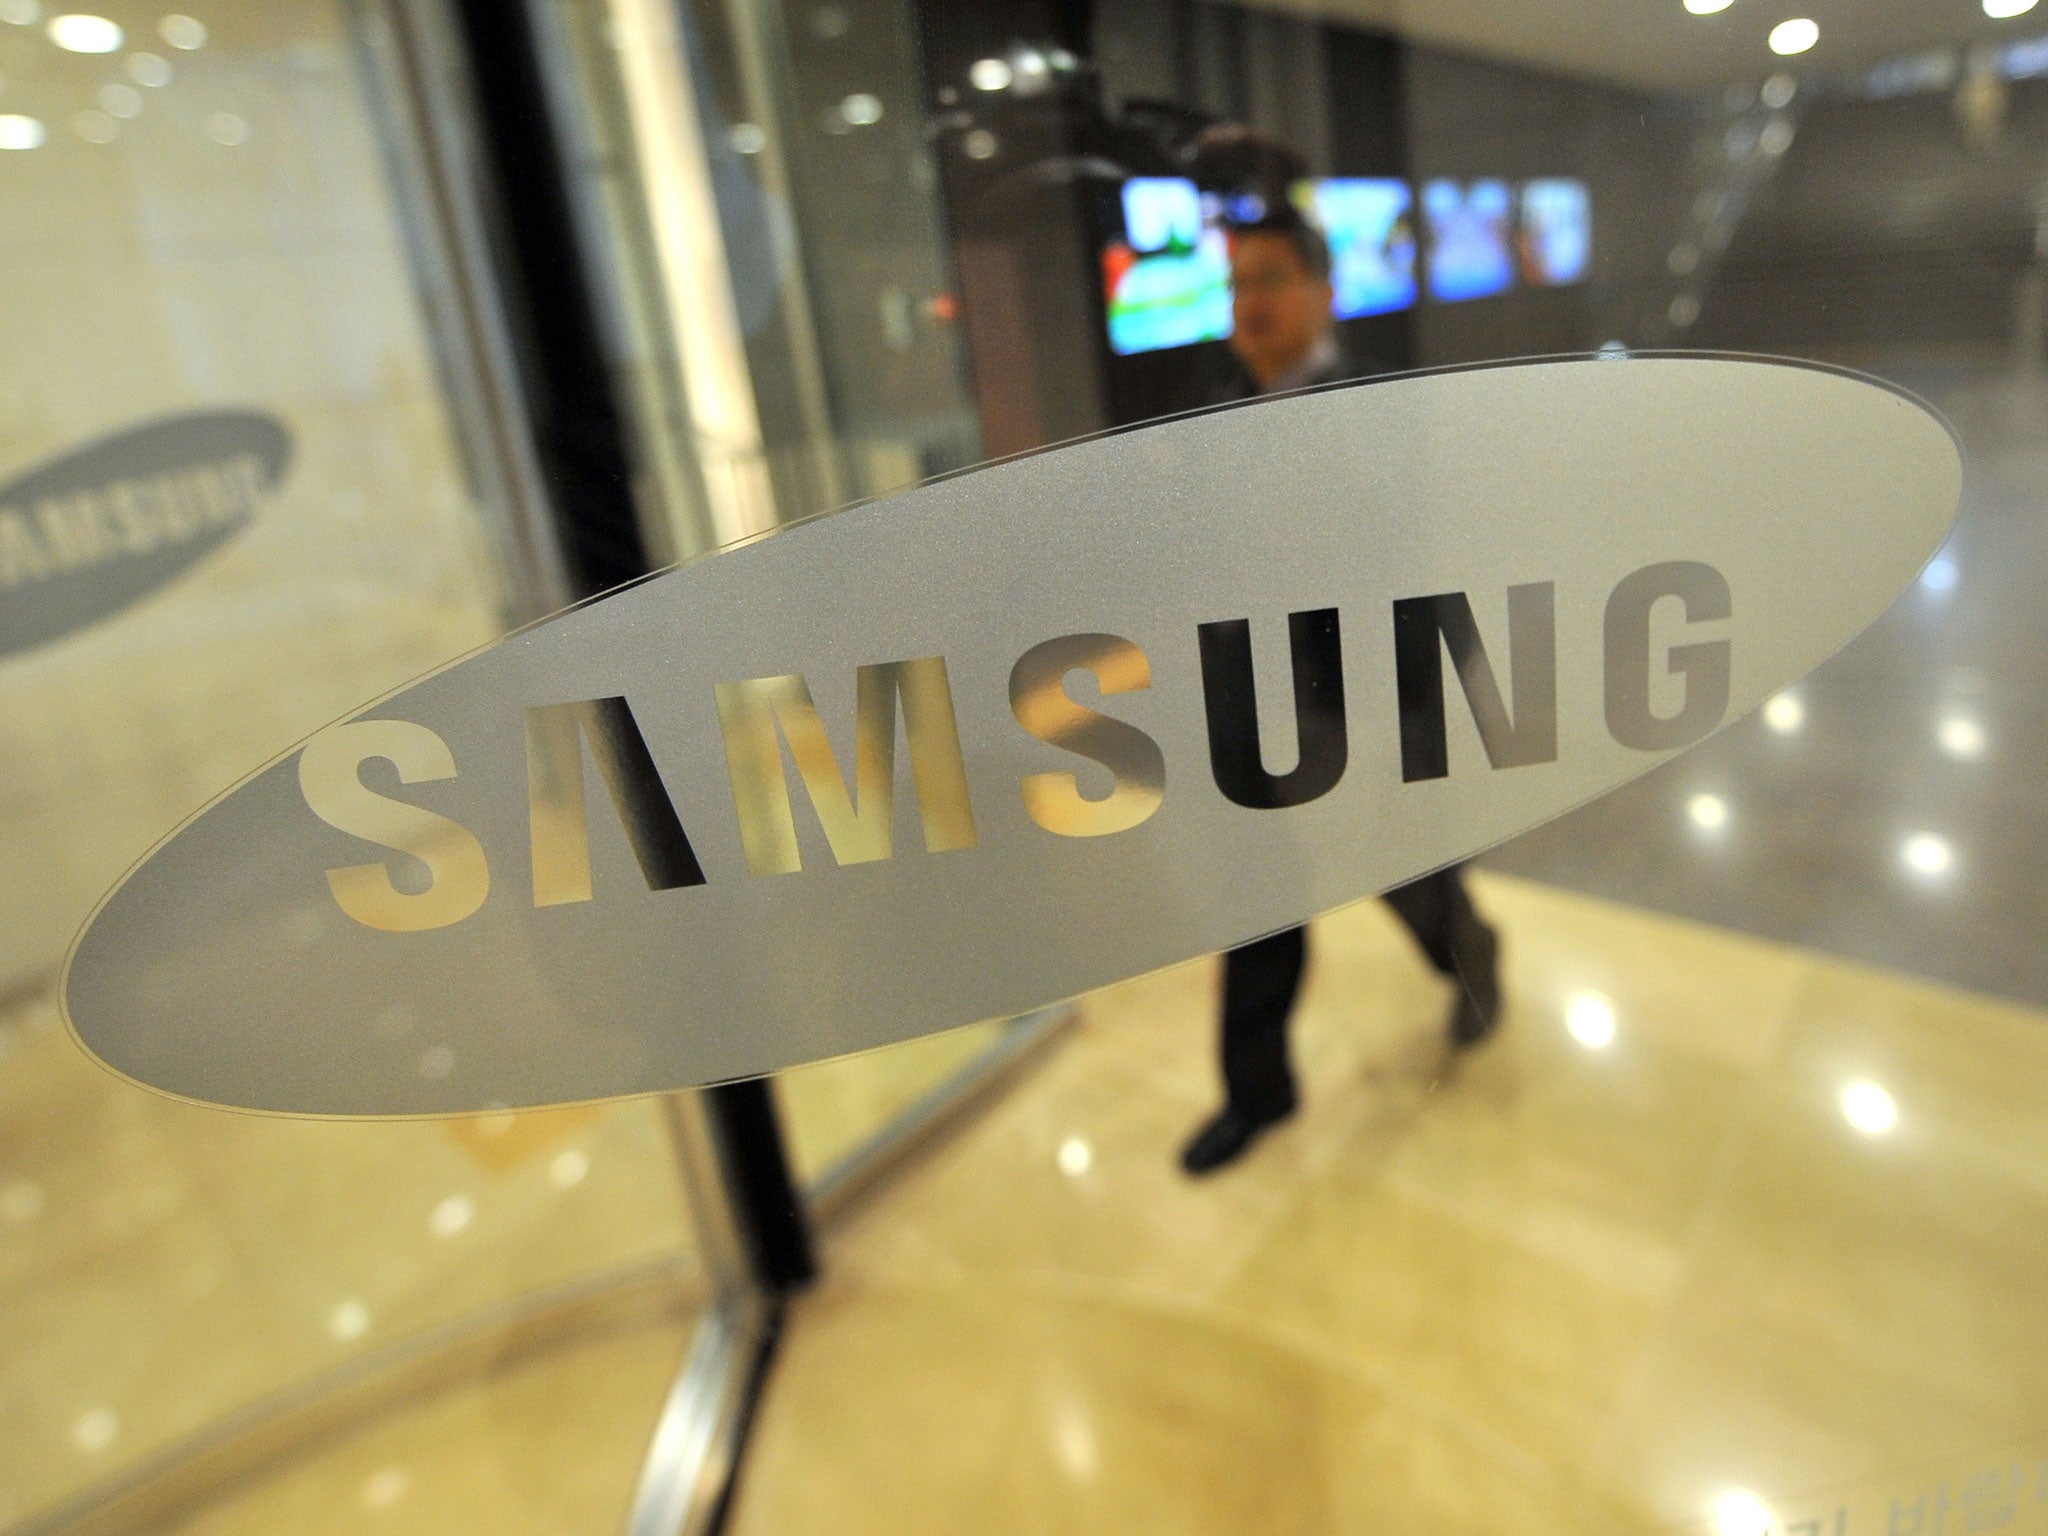 Samsung are looking into introducing eye iris scanning technology in the Galaxy S5.